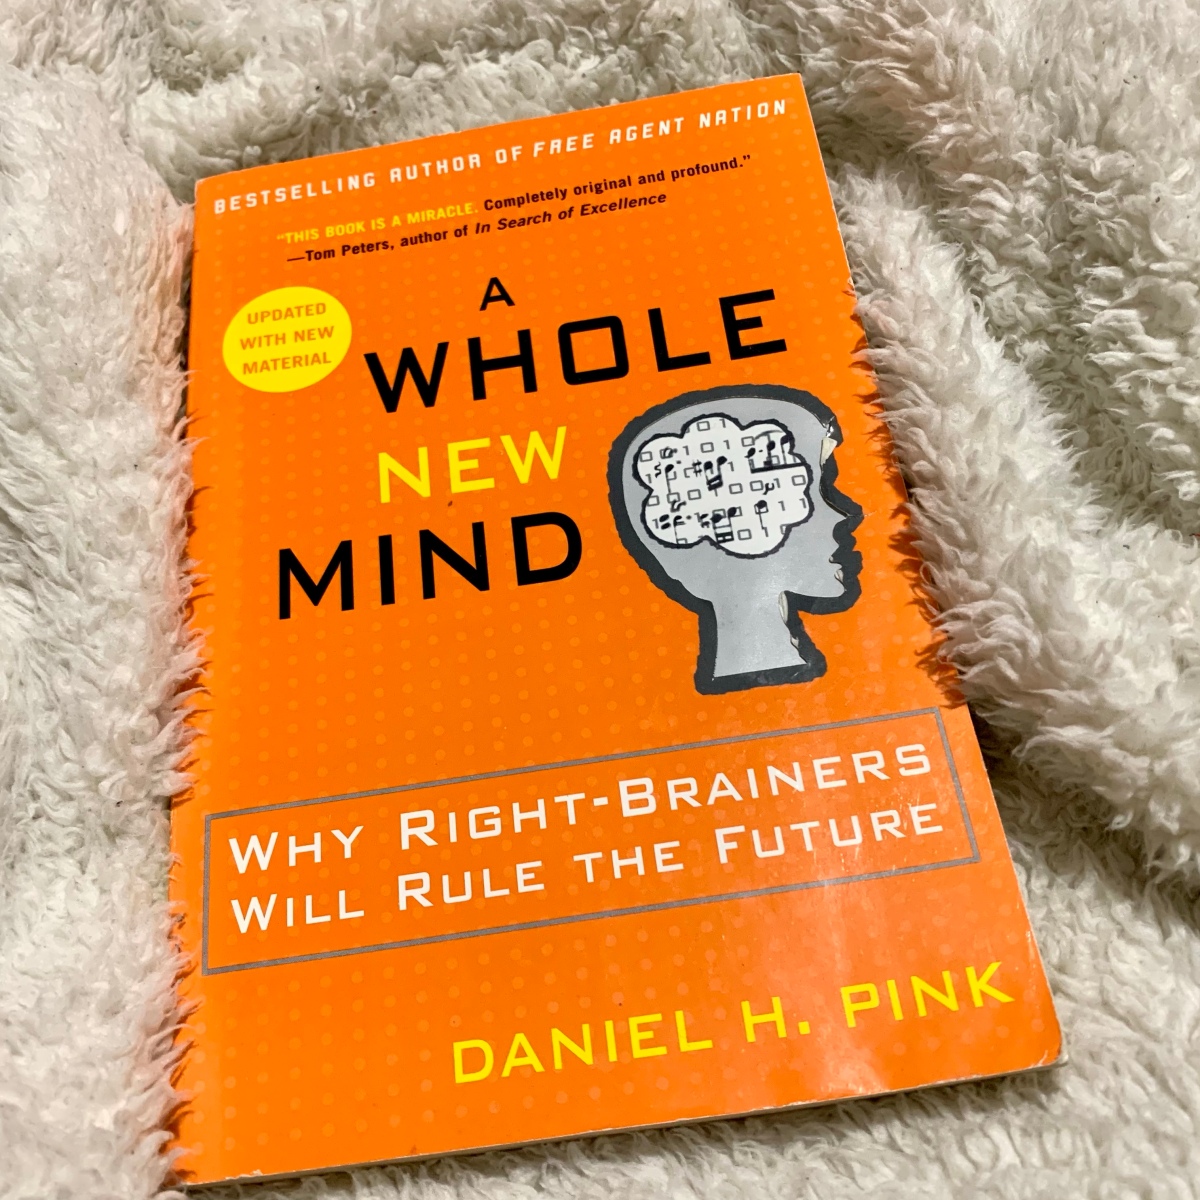 ‘A Whole New Mind’ by Daniel Pink